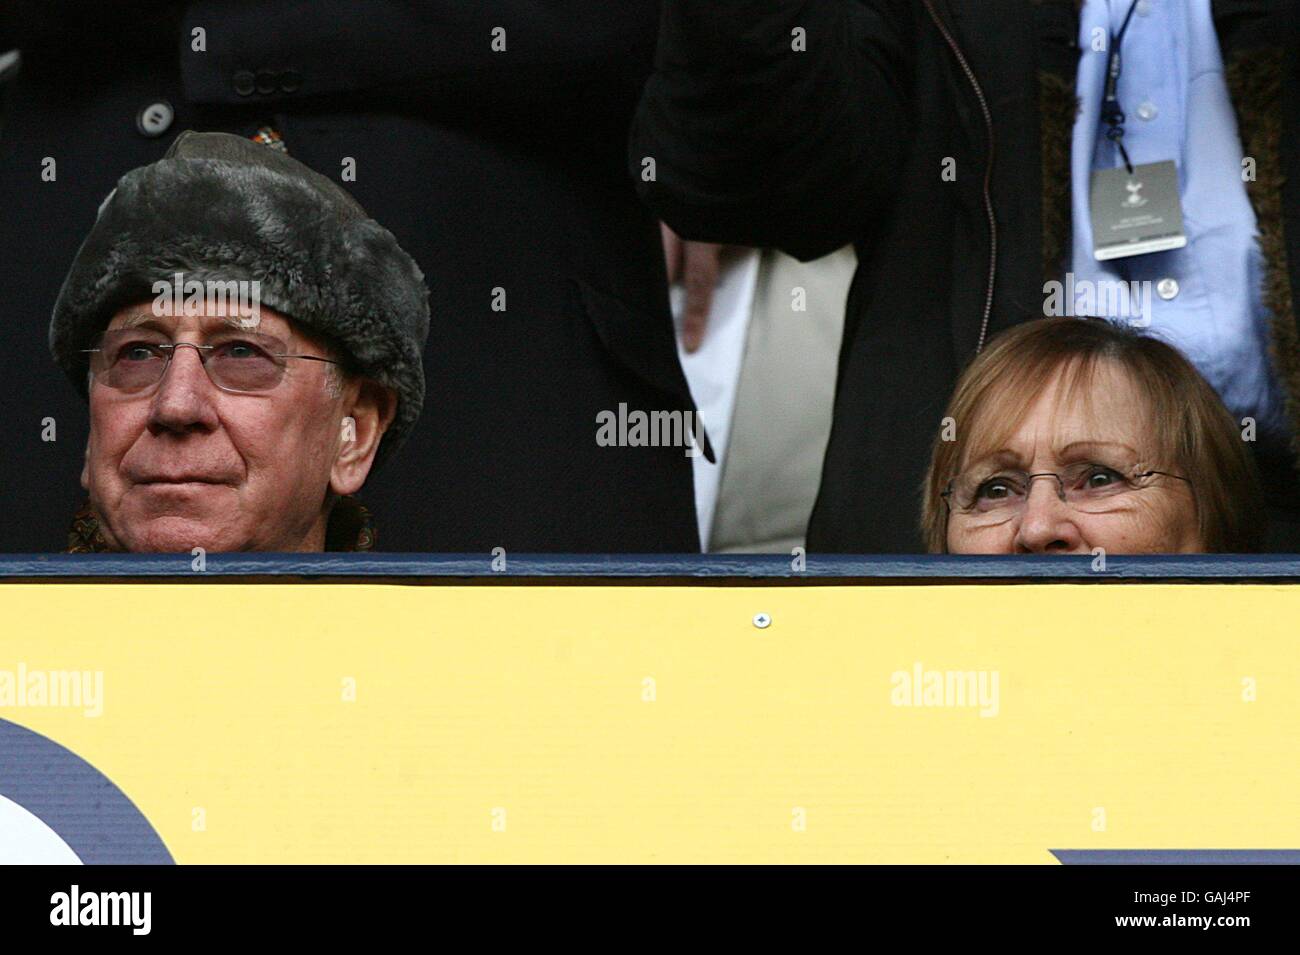 Soccer - Barclays Premier League - Tottenham Hotspur v Manchester United - White Hart Lane. Sir Bobby Charlton and his wife Lady Norma Charlton in the stands Stock Photo